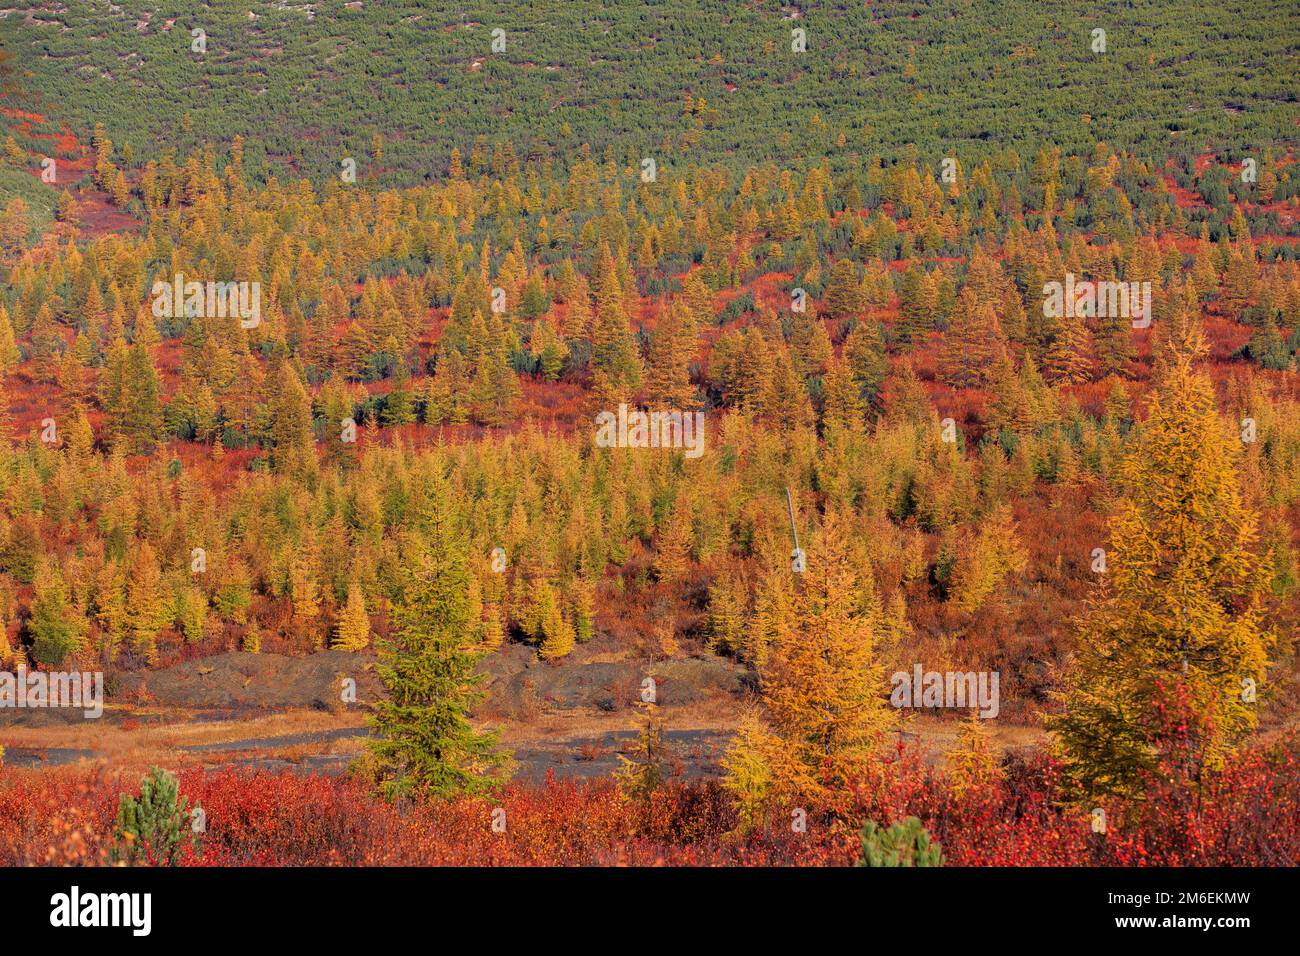 The nature of the Magadan region. Colored tundra during golden autumn in Russia. Stock Photo